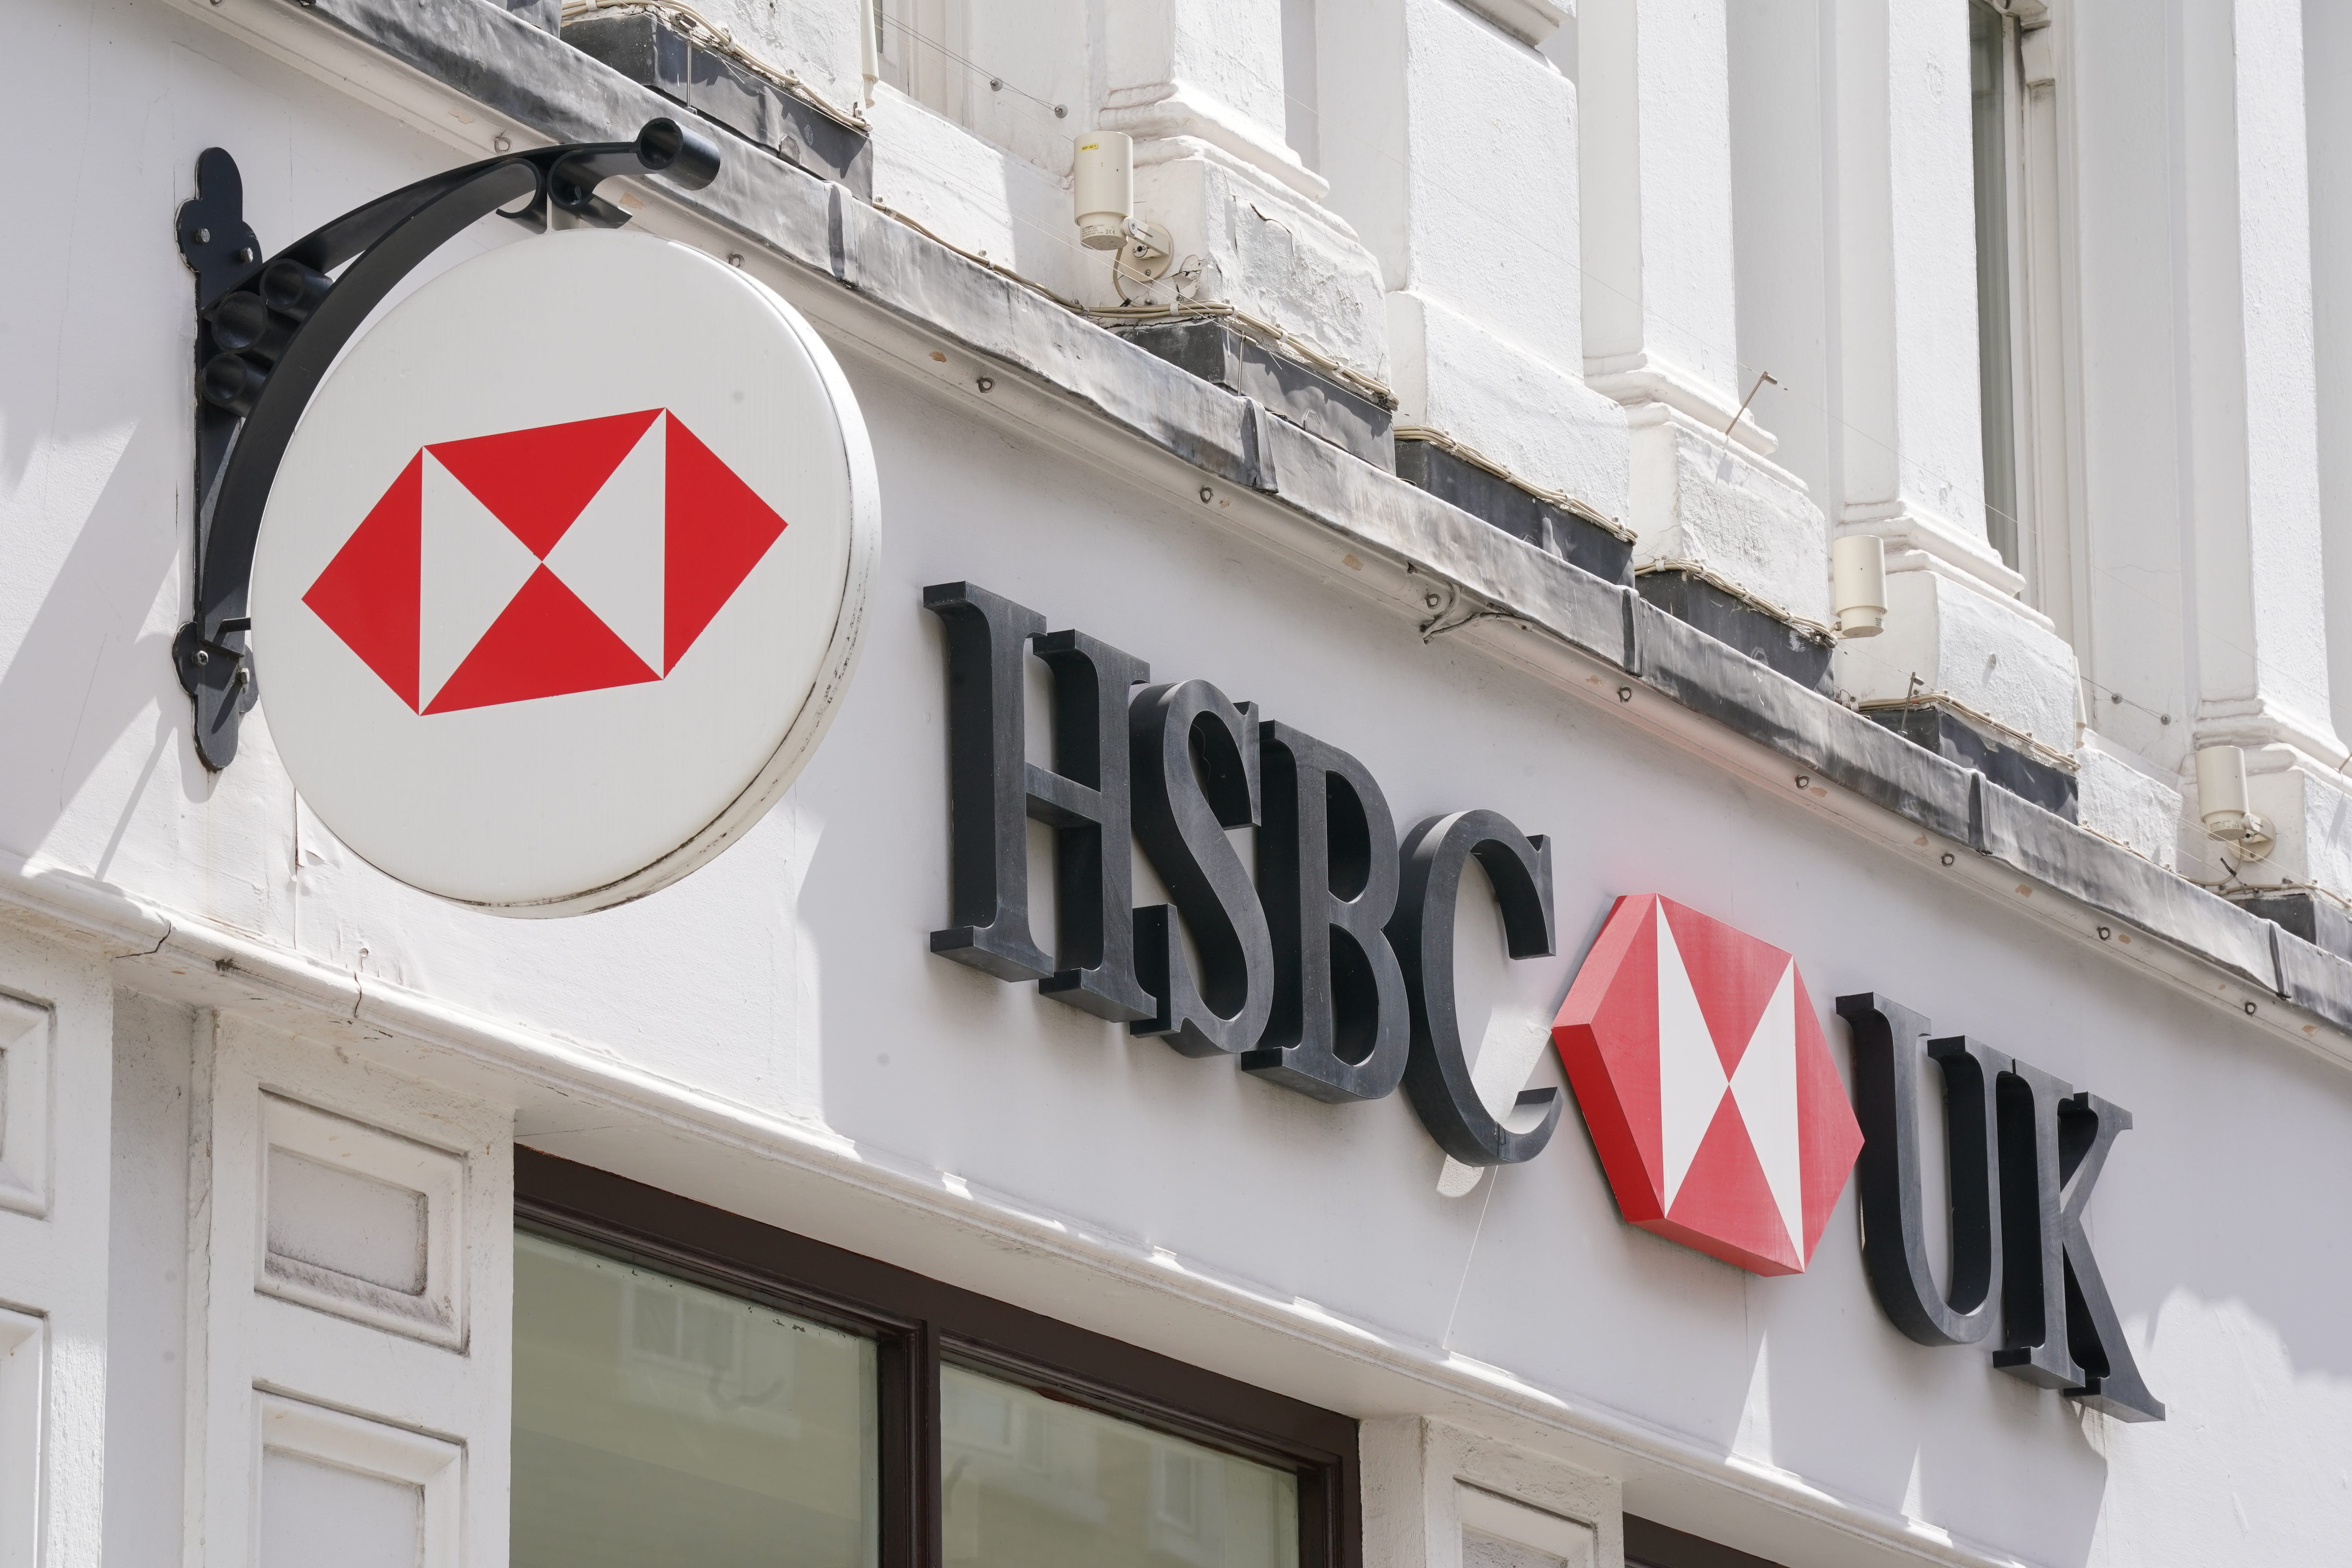 HSBC has been fined £57.4m by a watchdog